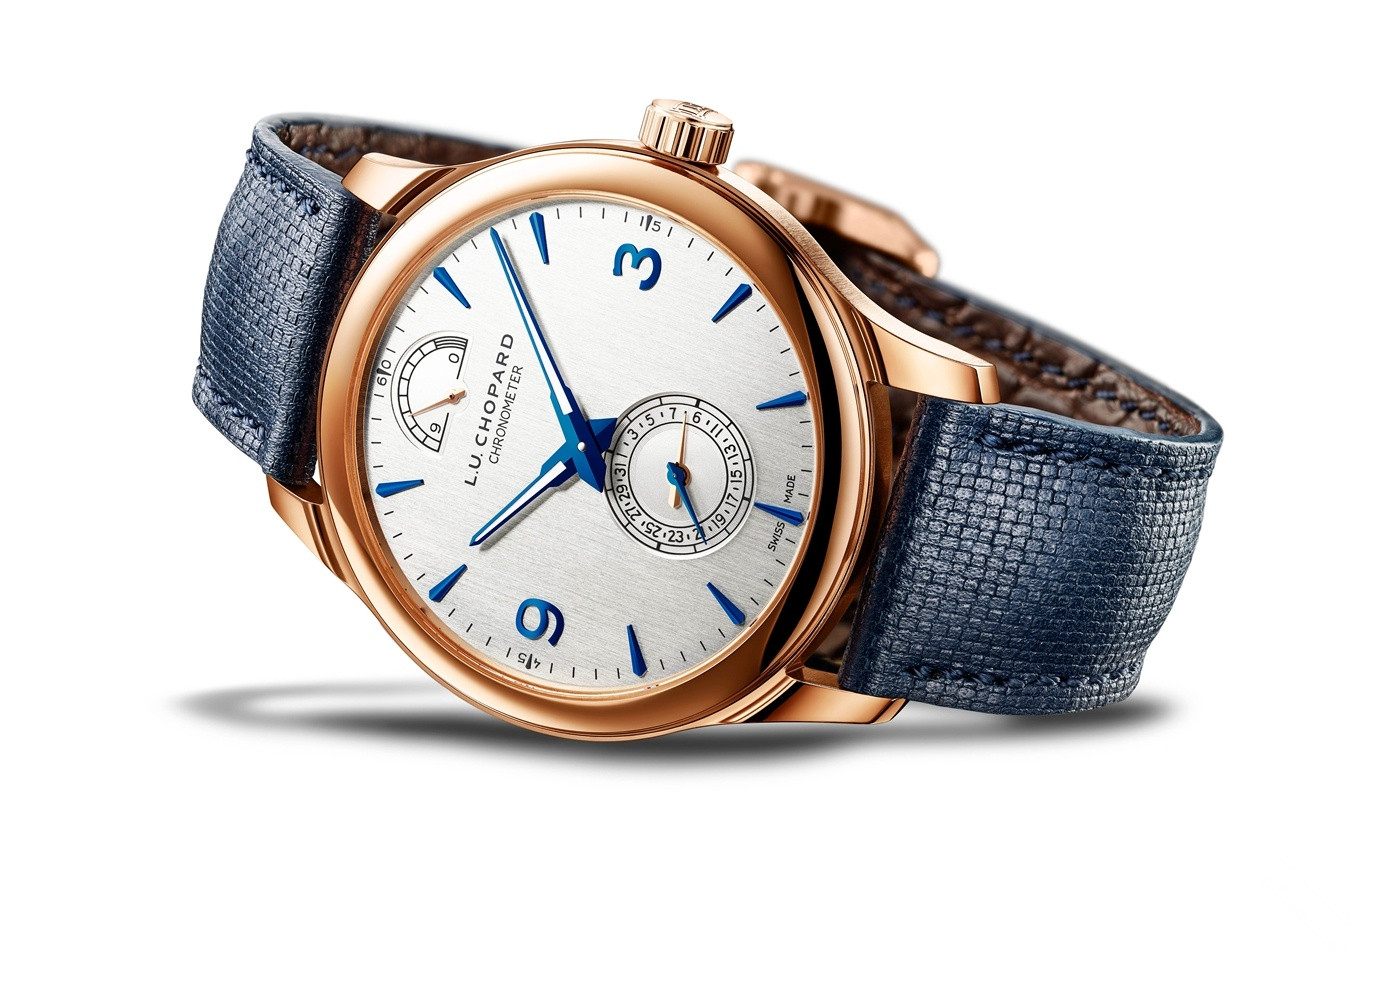 This Chopard fake watch with white dial has high texture.